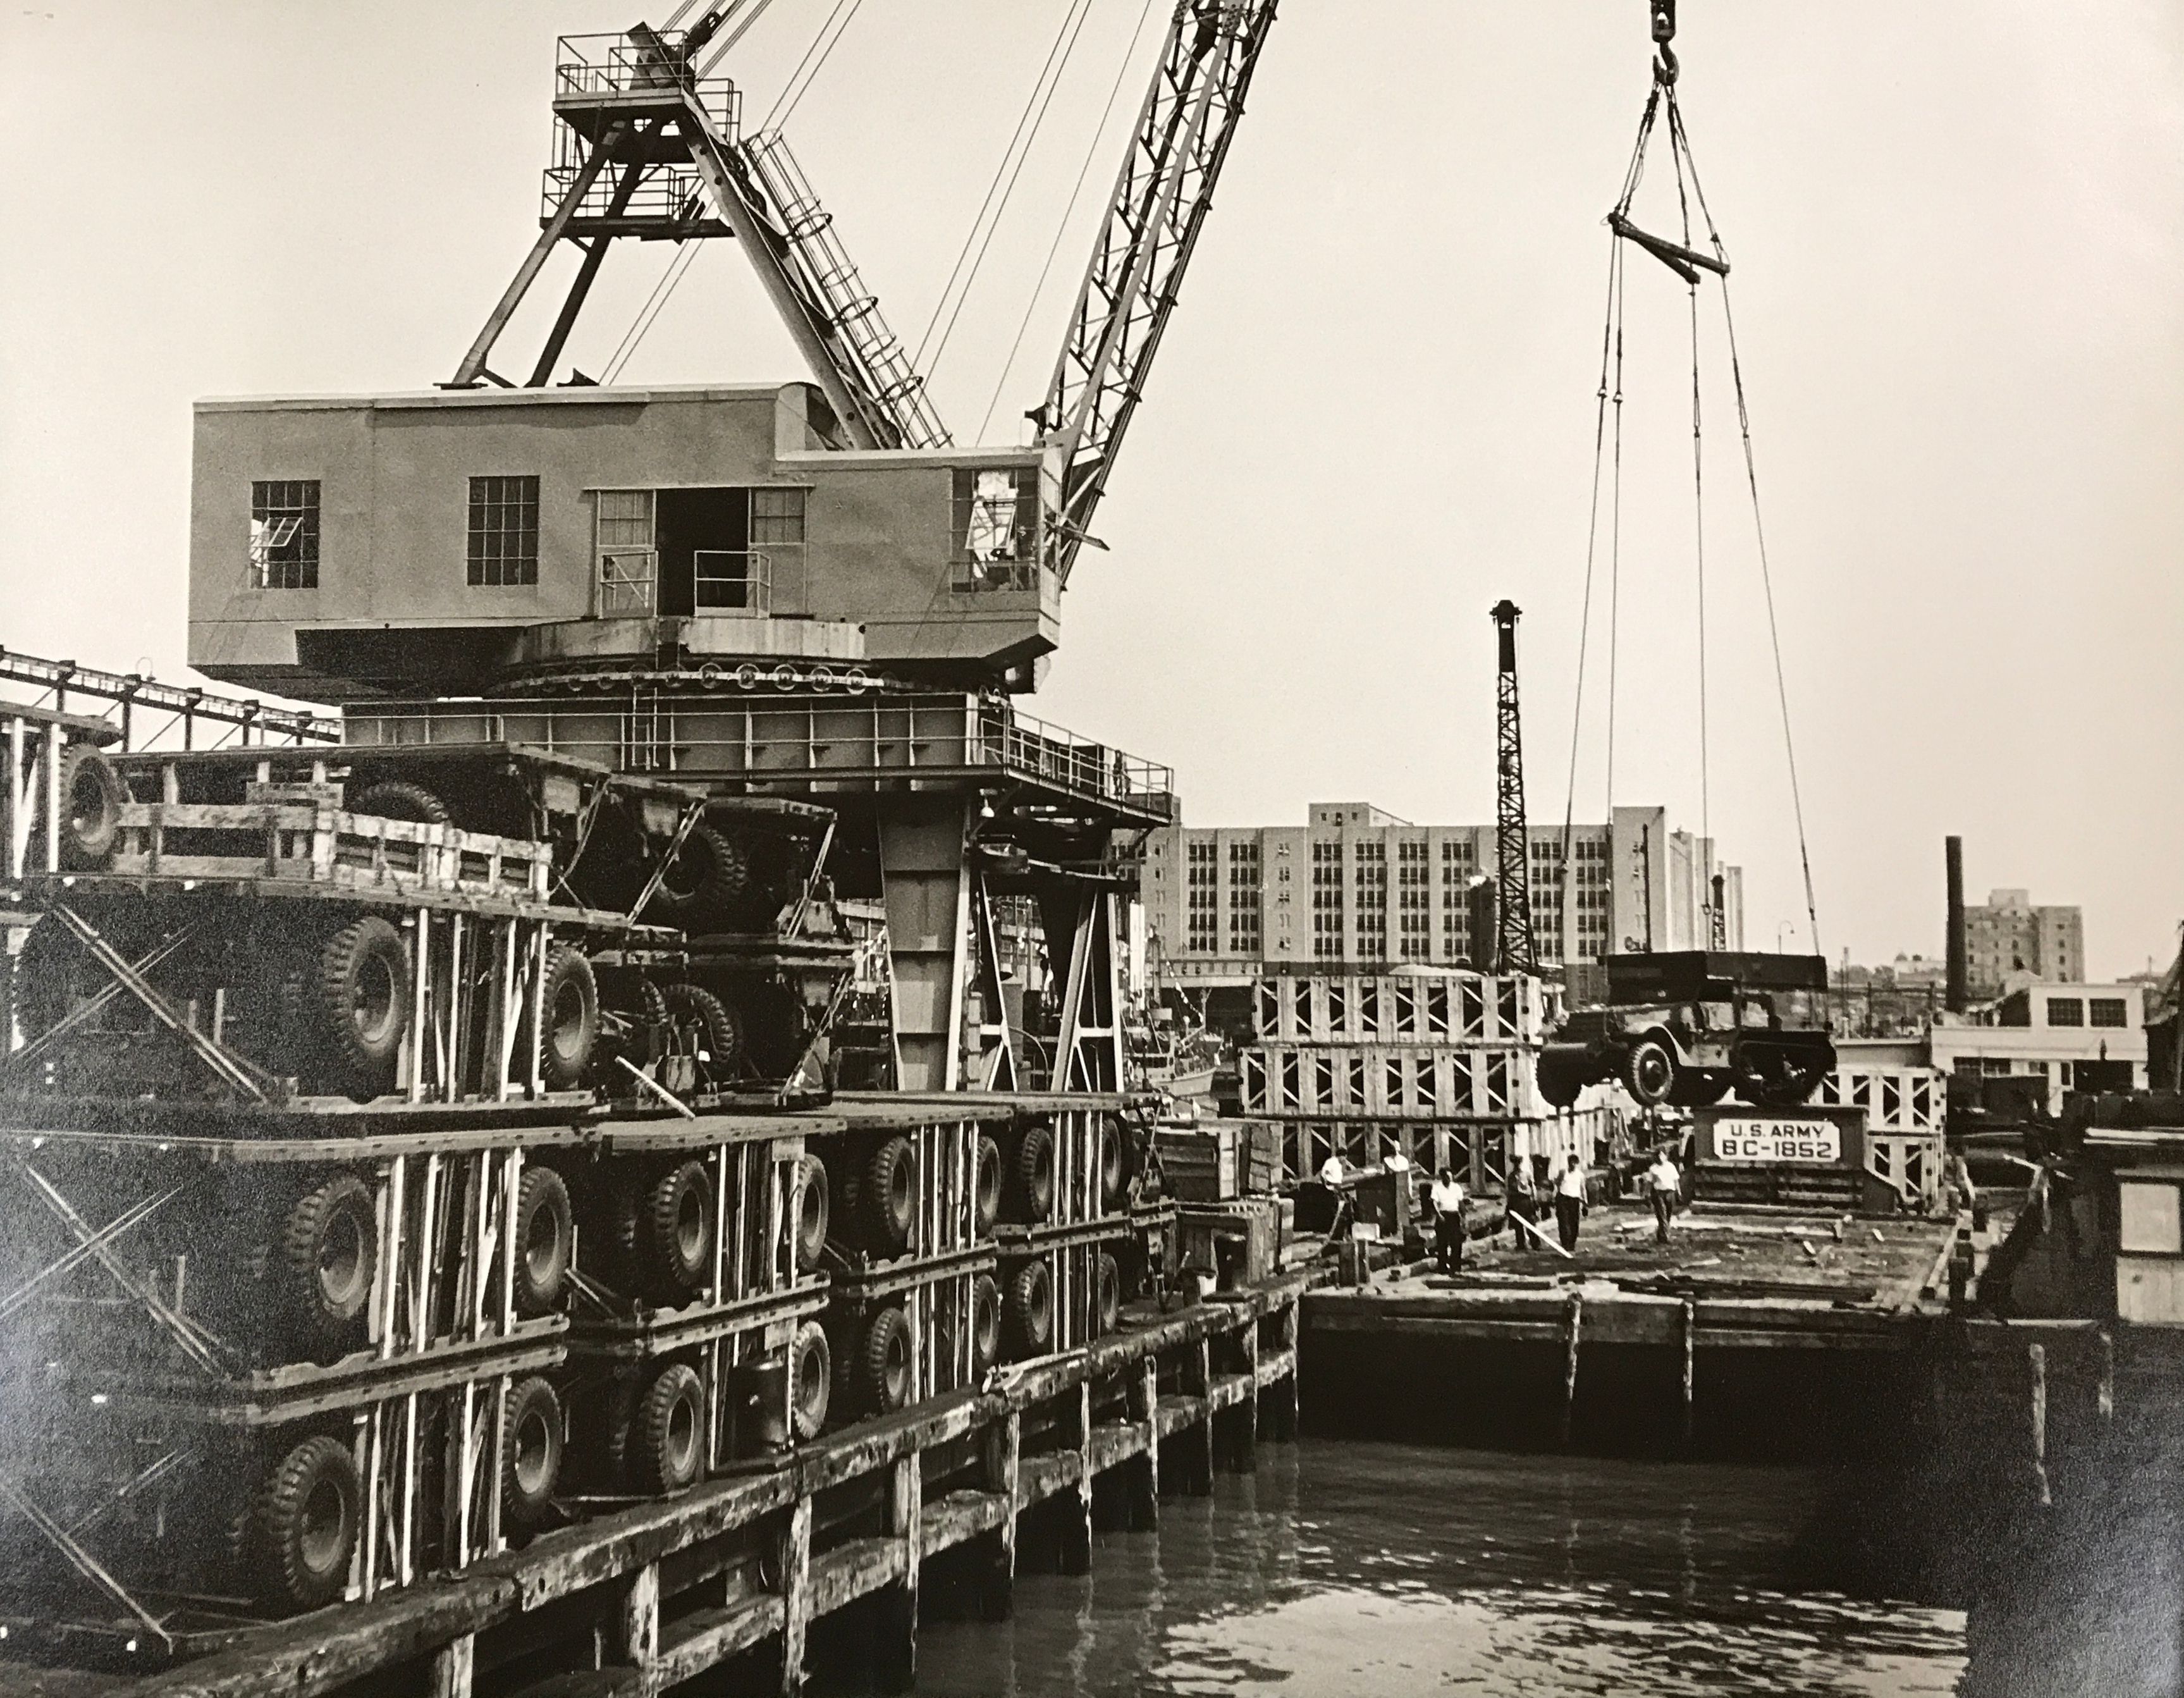 A crane lifting a jeep onto a barge with the warehouse of the Brooklyn Army Terminal visible in the background.